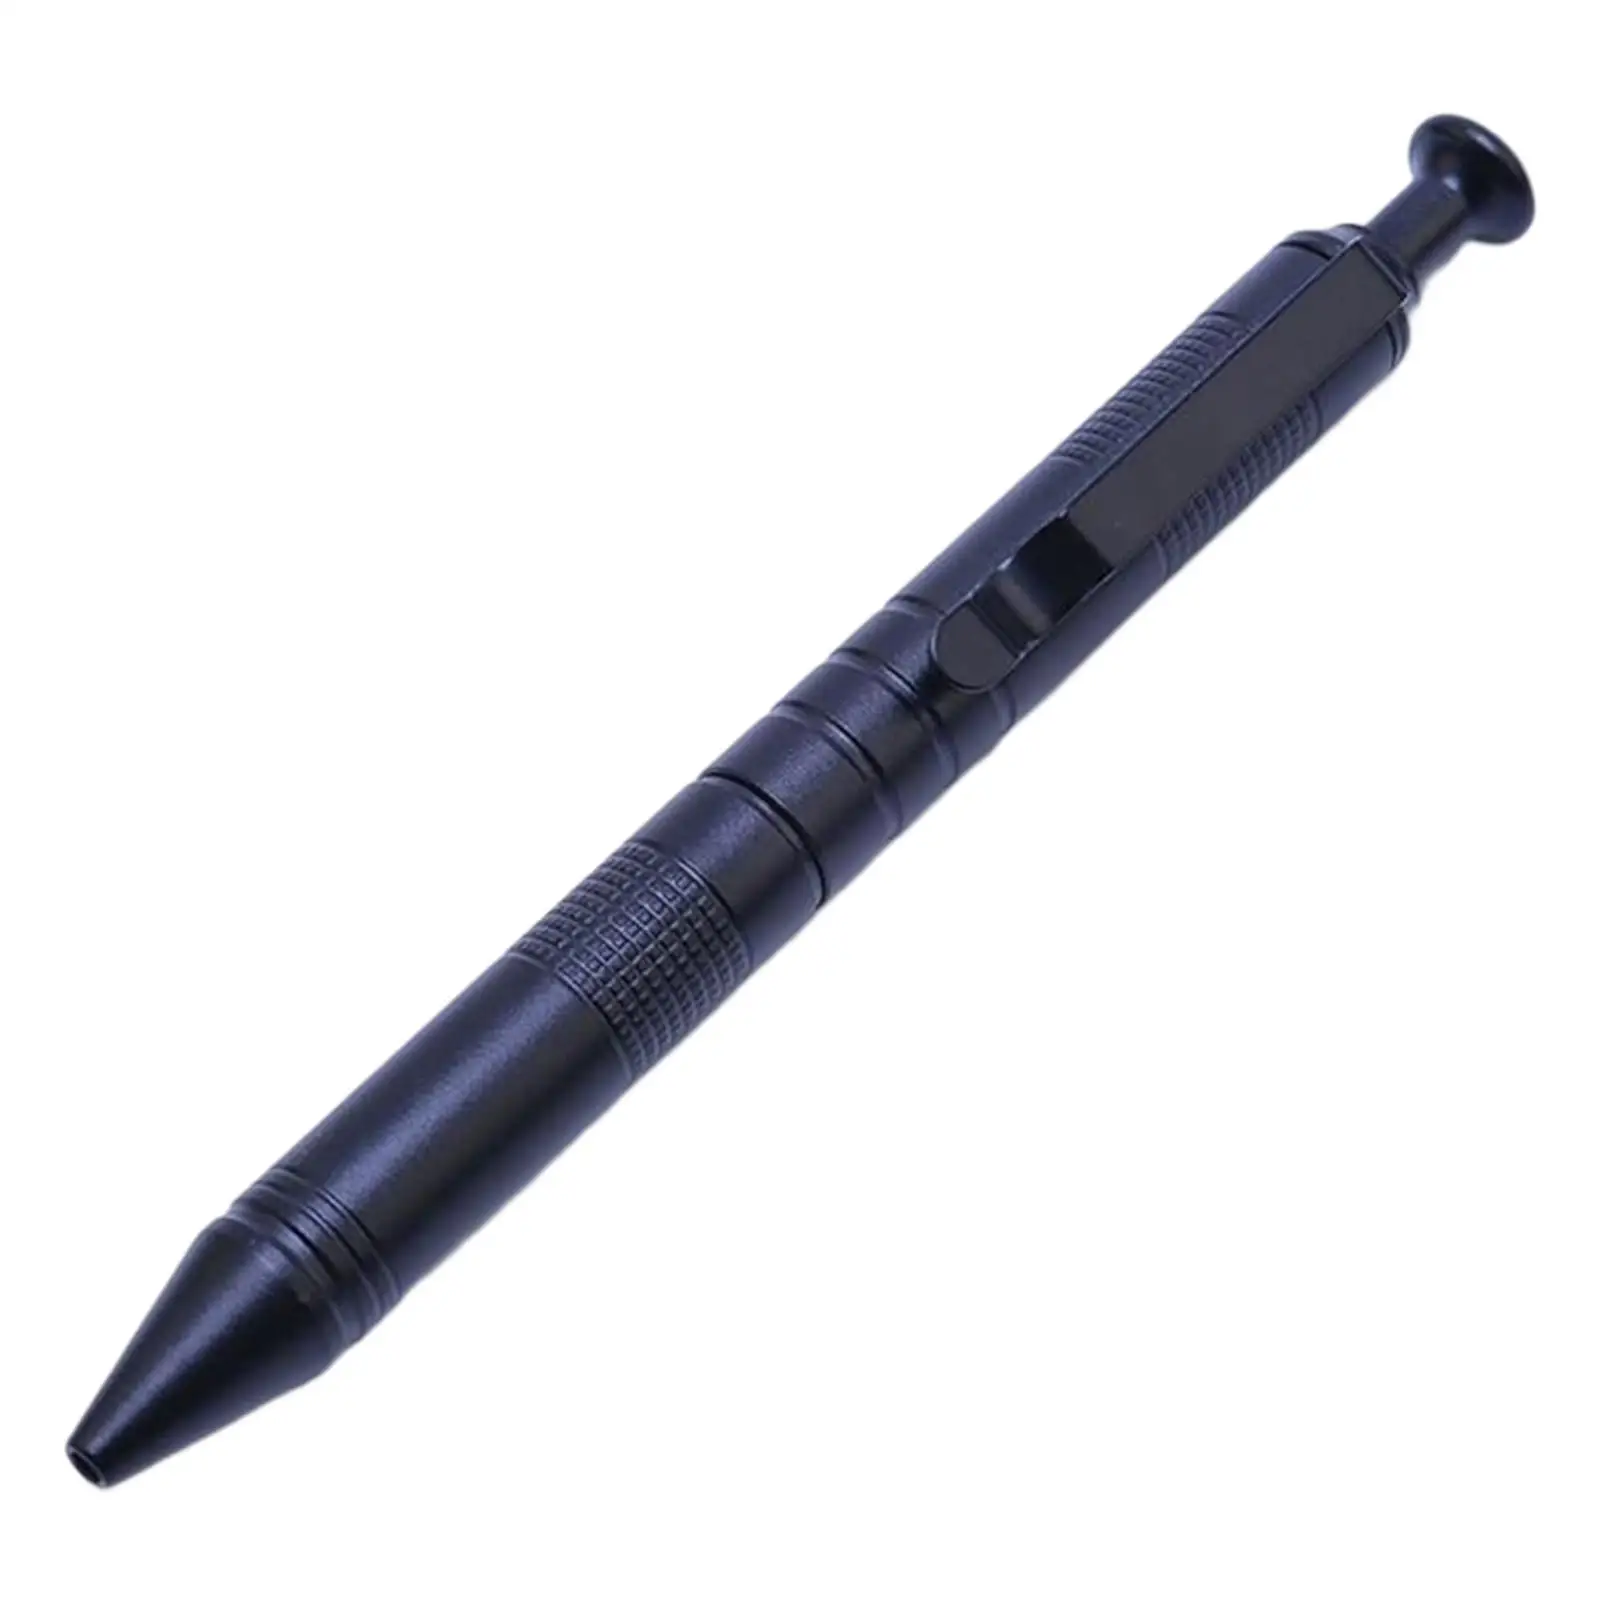 Signatures Personal Pen Outdoor Sports Accessories Tool Durable Pocket Multifunctional Supplies Sturdy Defensa Ballpoint Pen